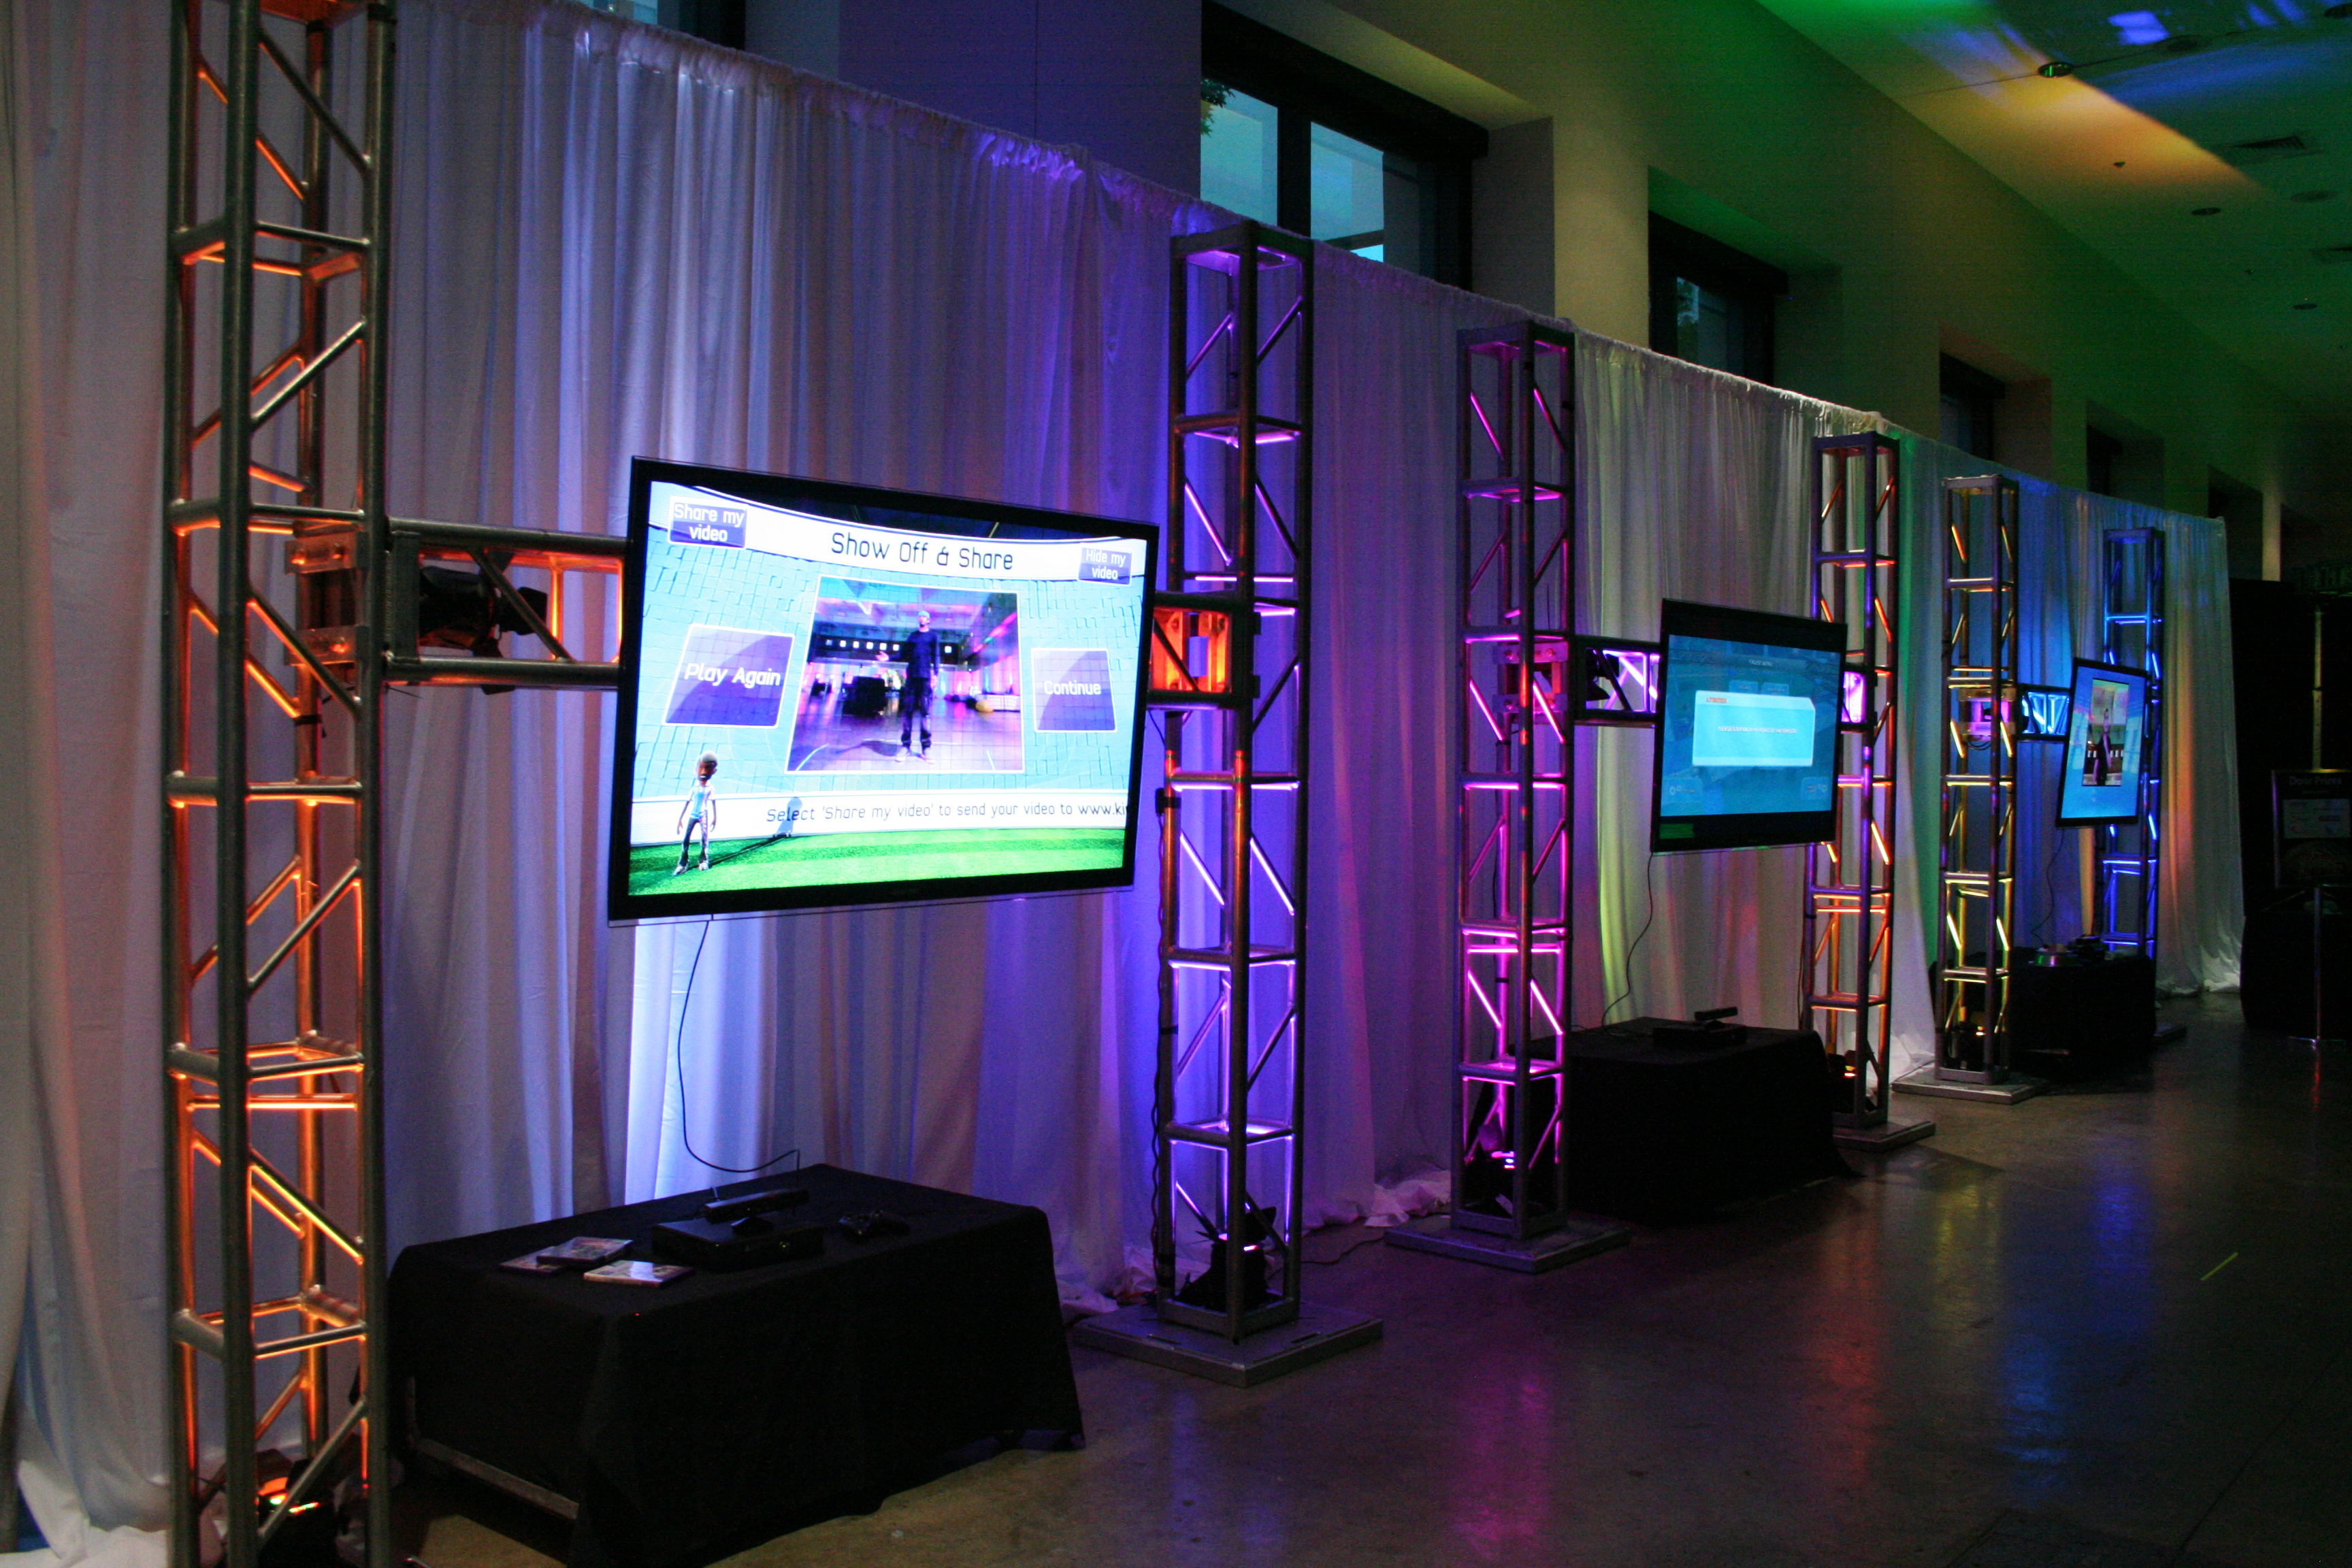 CORPORATE-22-Wii-XBox-Watch-TV-Marquis-for-Your-Event